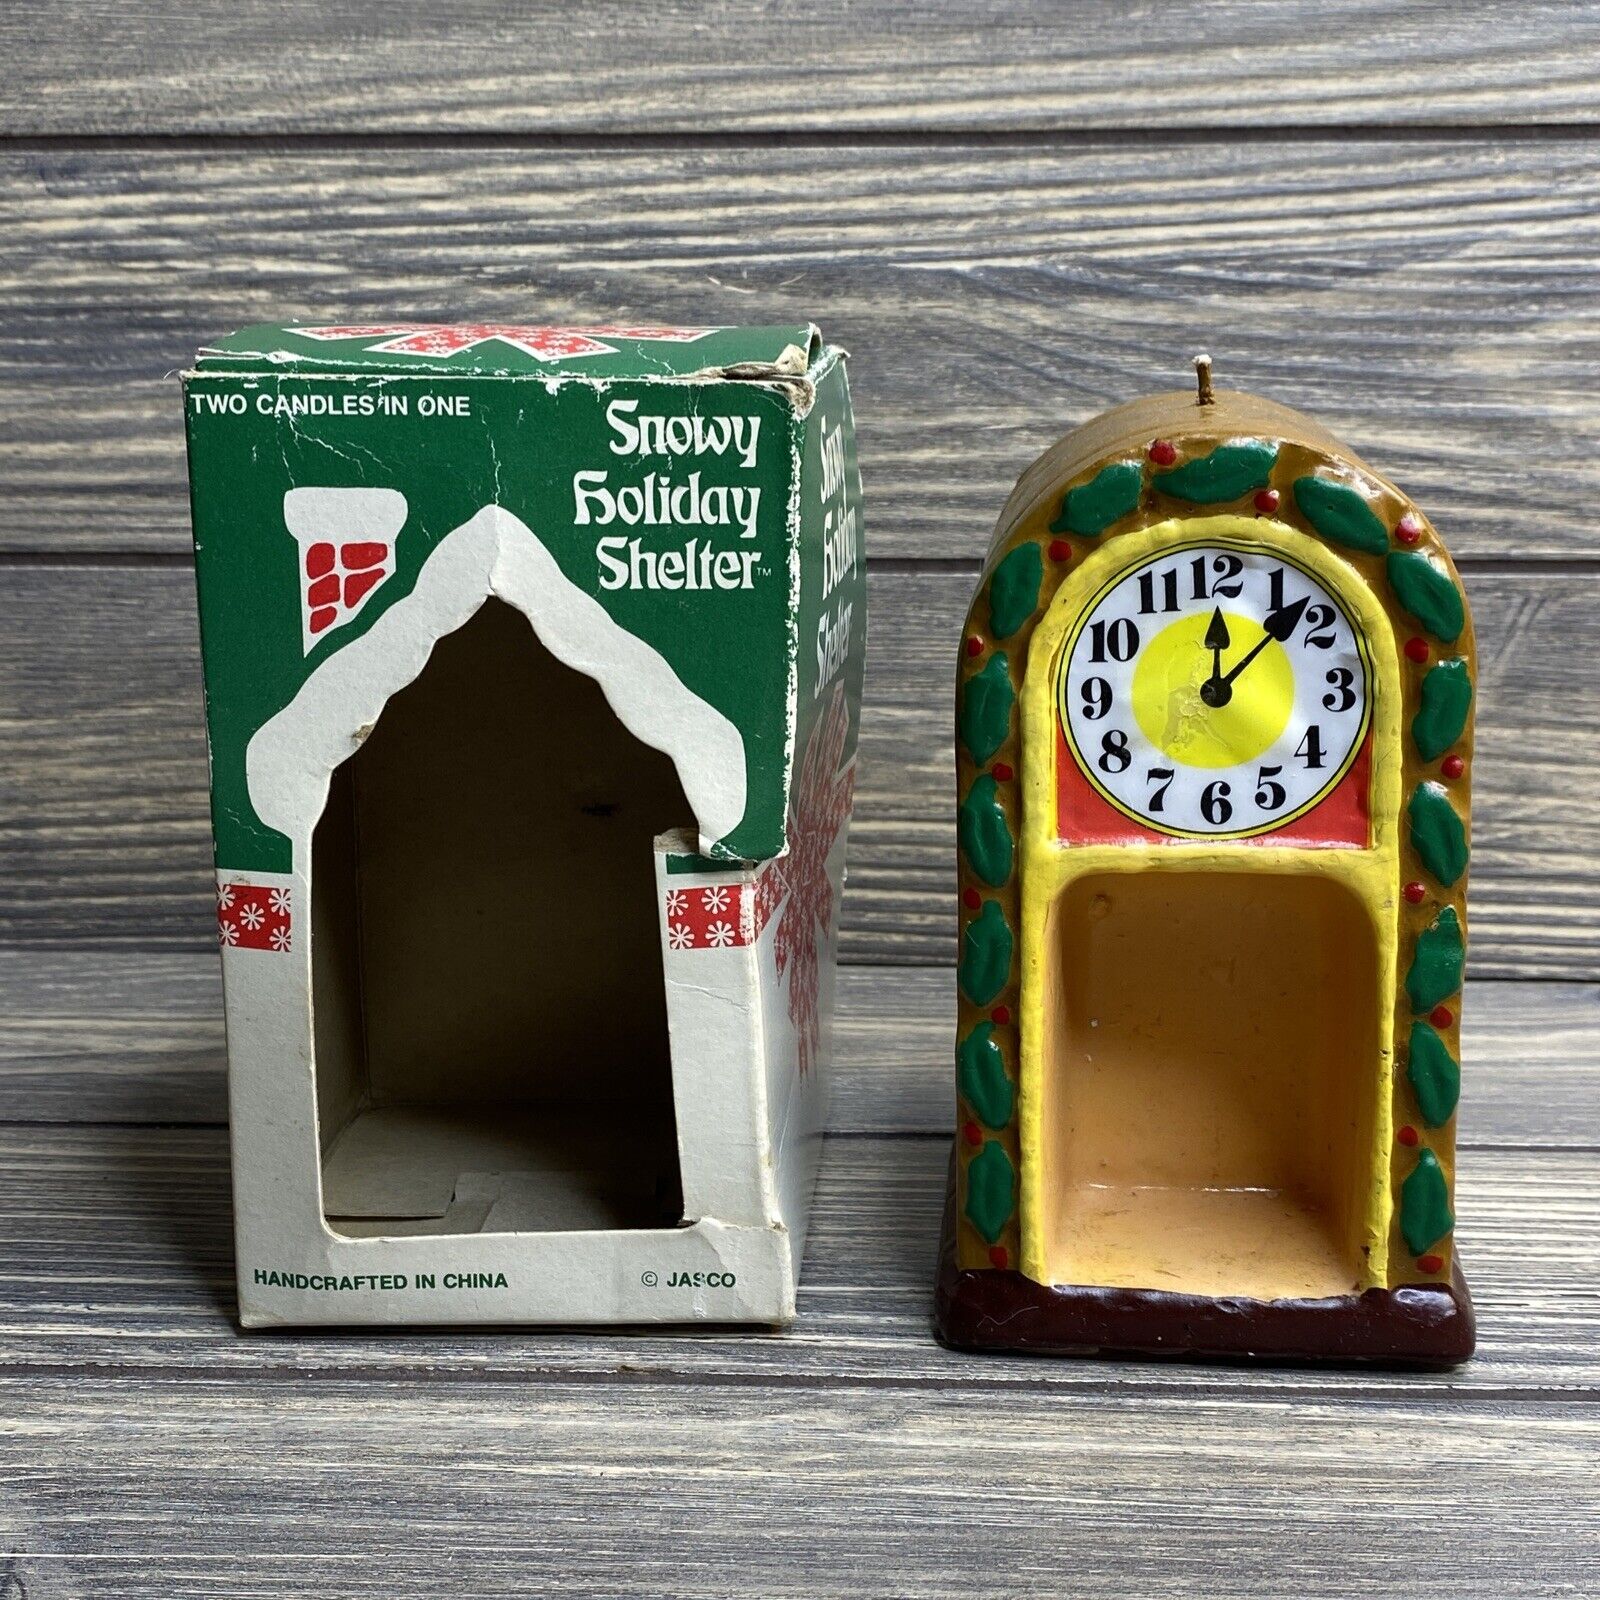 Vintage Jasco Snowy Holiday Shelter Handcrafted Candle Clock Holly Leaves 5”